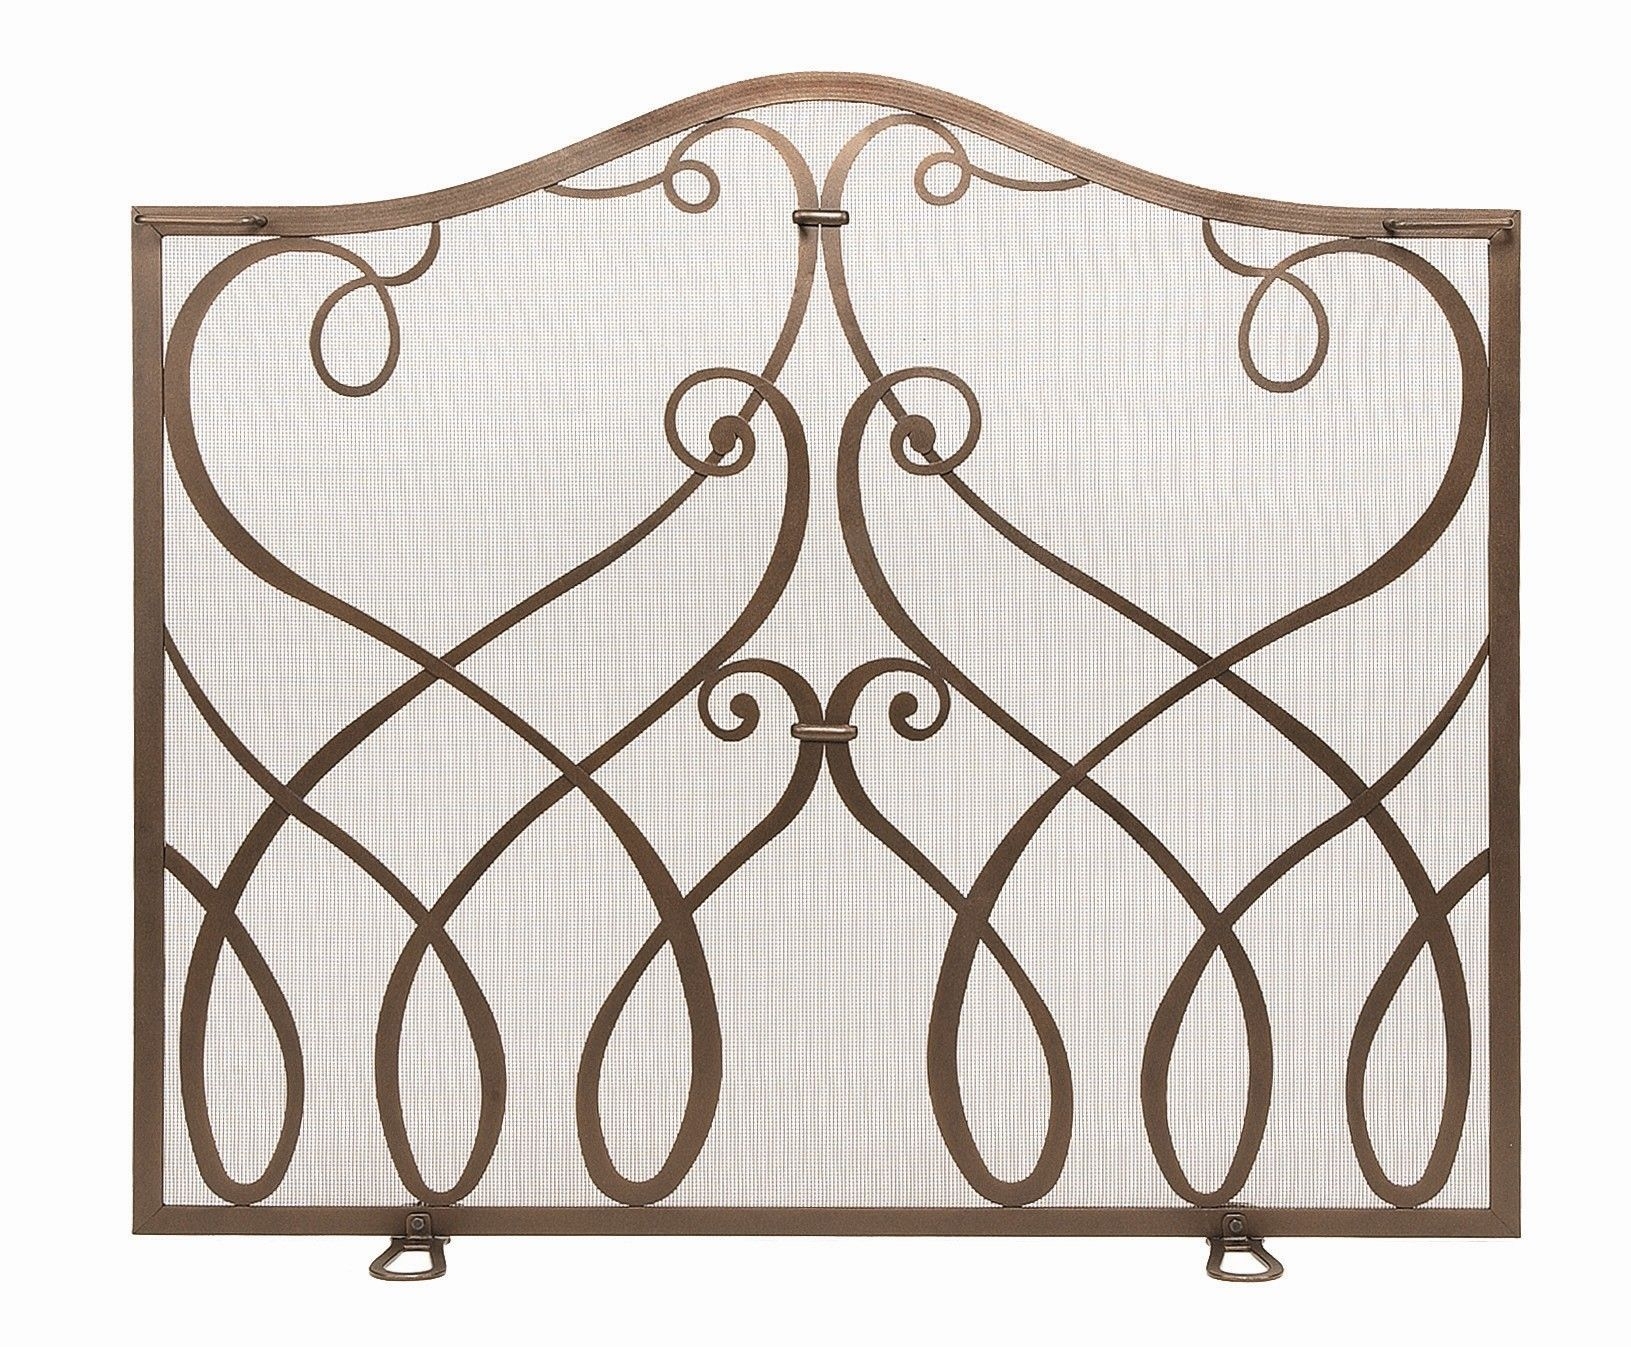 Cypher Wrought Iron Fireplace Screen